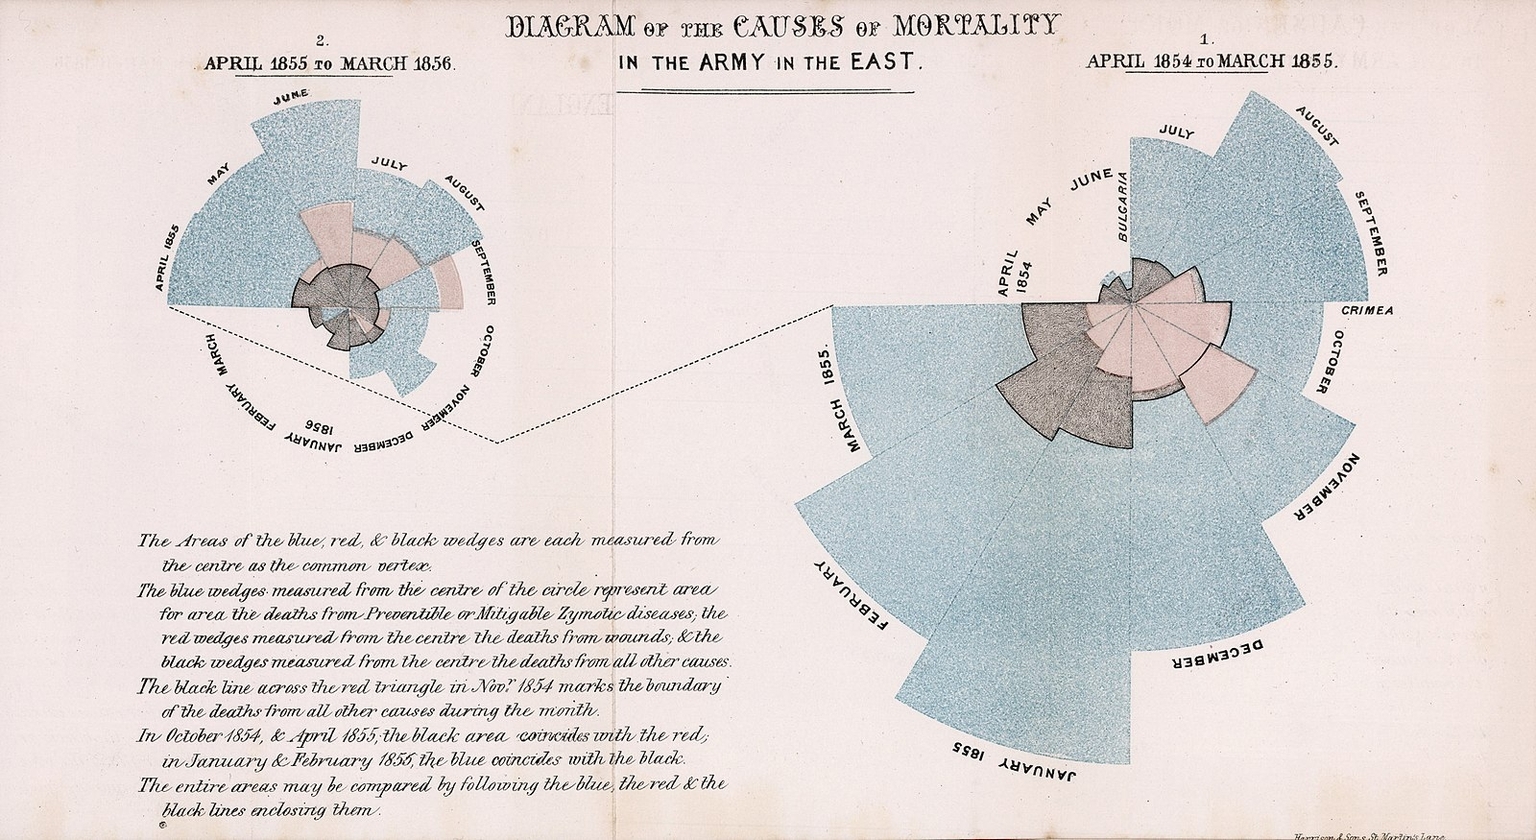 Florence Nightingale's rose chart is a well-known circular historical data visualization. She utilized two circles divided into twelve wedges to depict the number of annual deaths. In this chart, blue represents deaths from sickness, red represents deaths from wounds inflicted by combat, and black represents deaths from other causes.